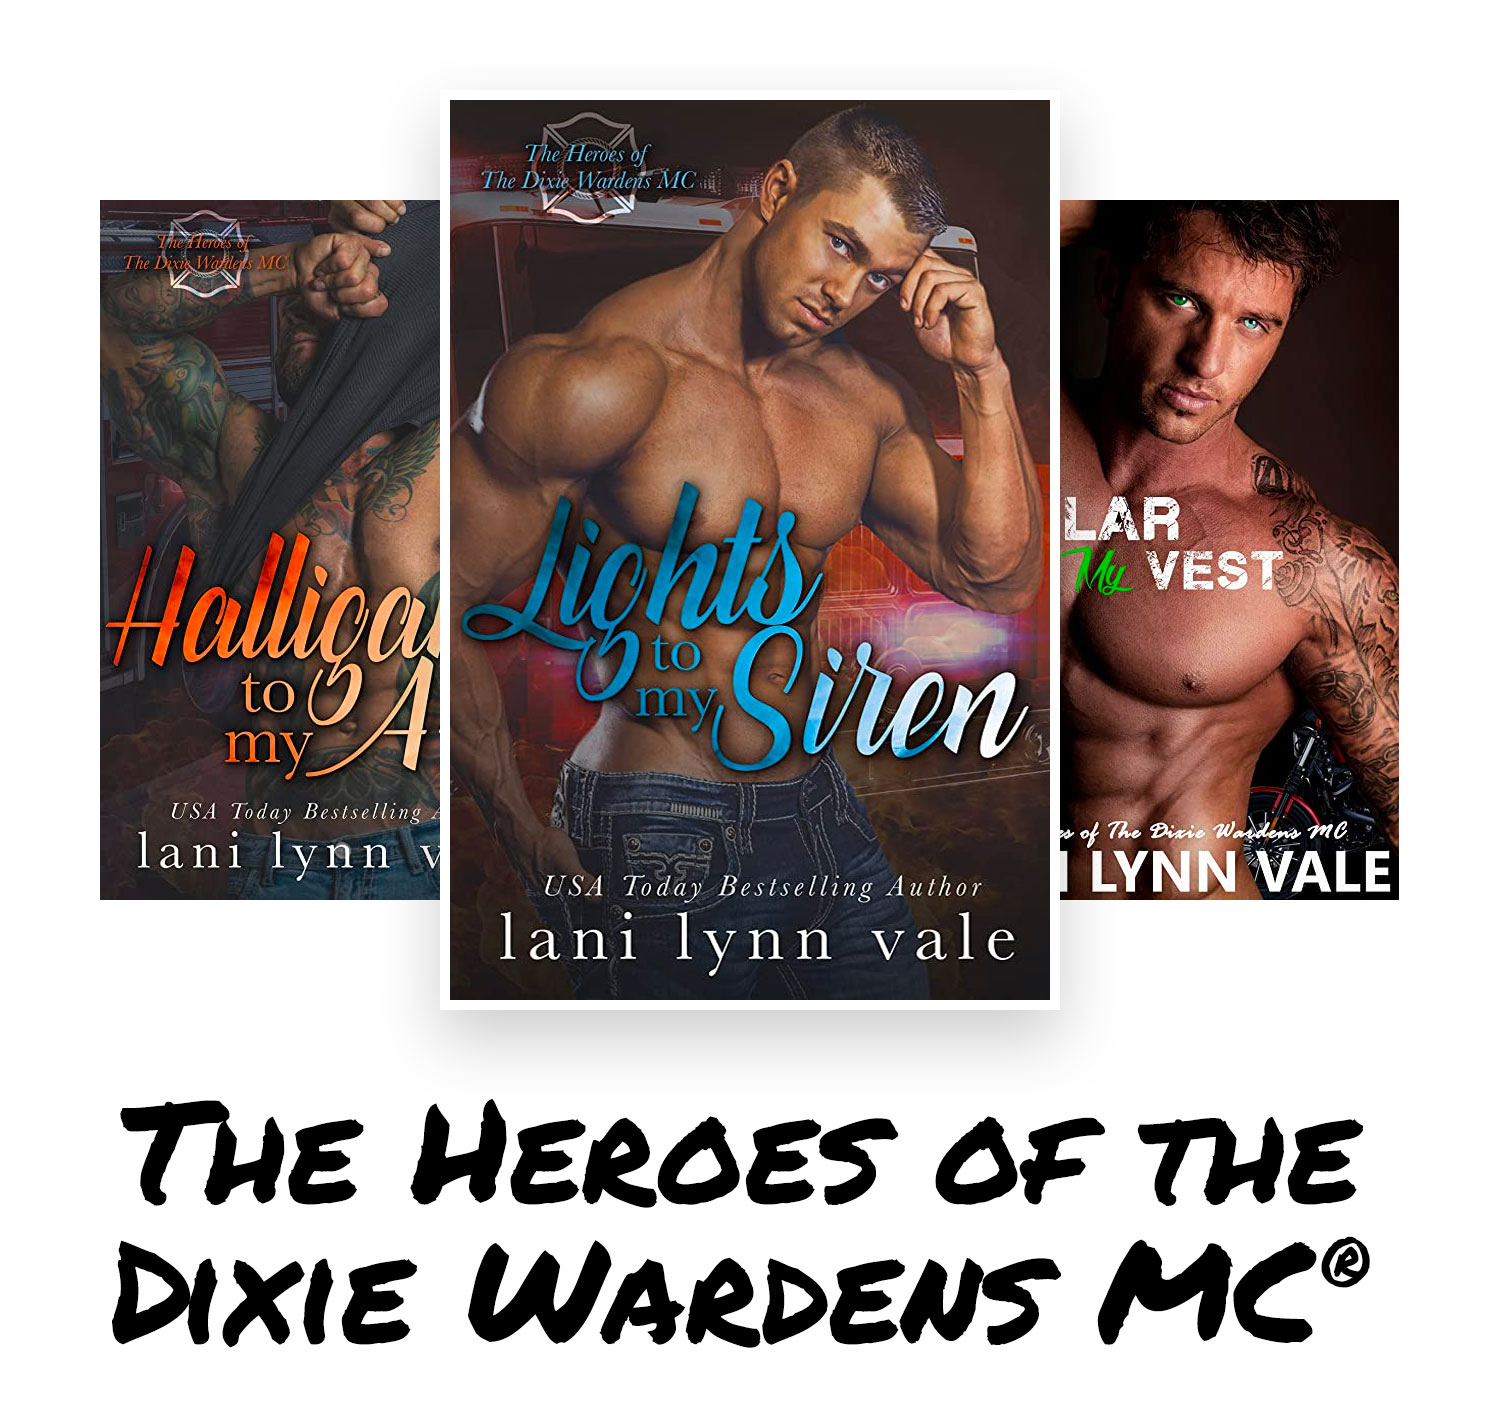 The Heroes of the Dixie Wardens MC®